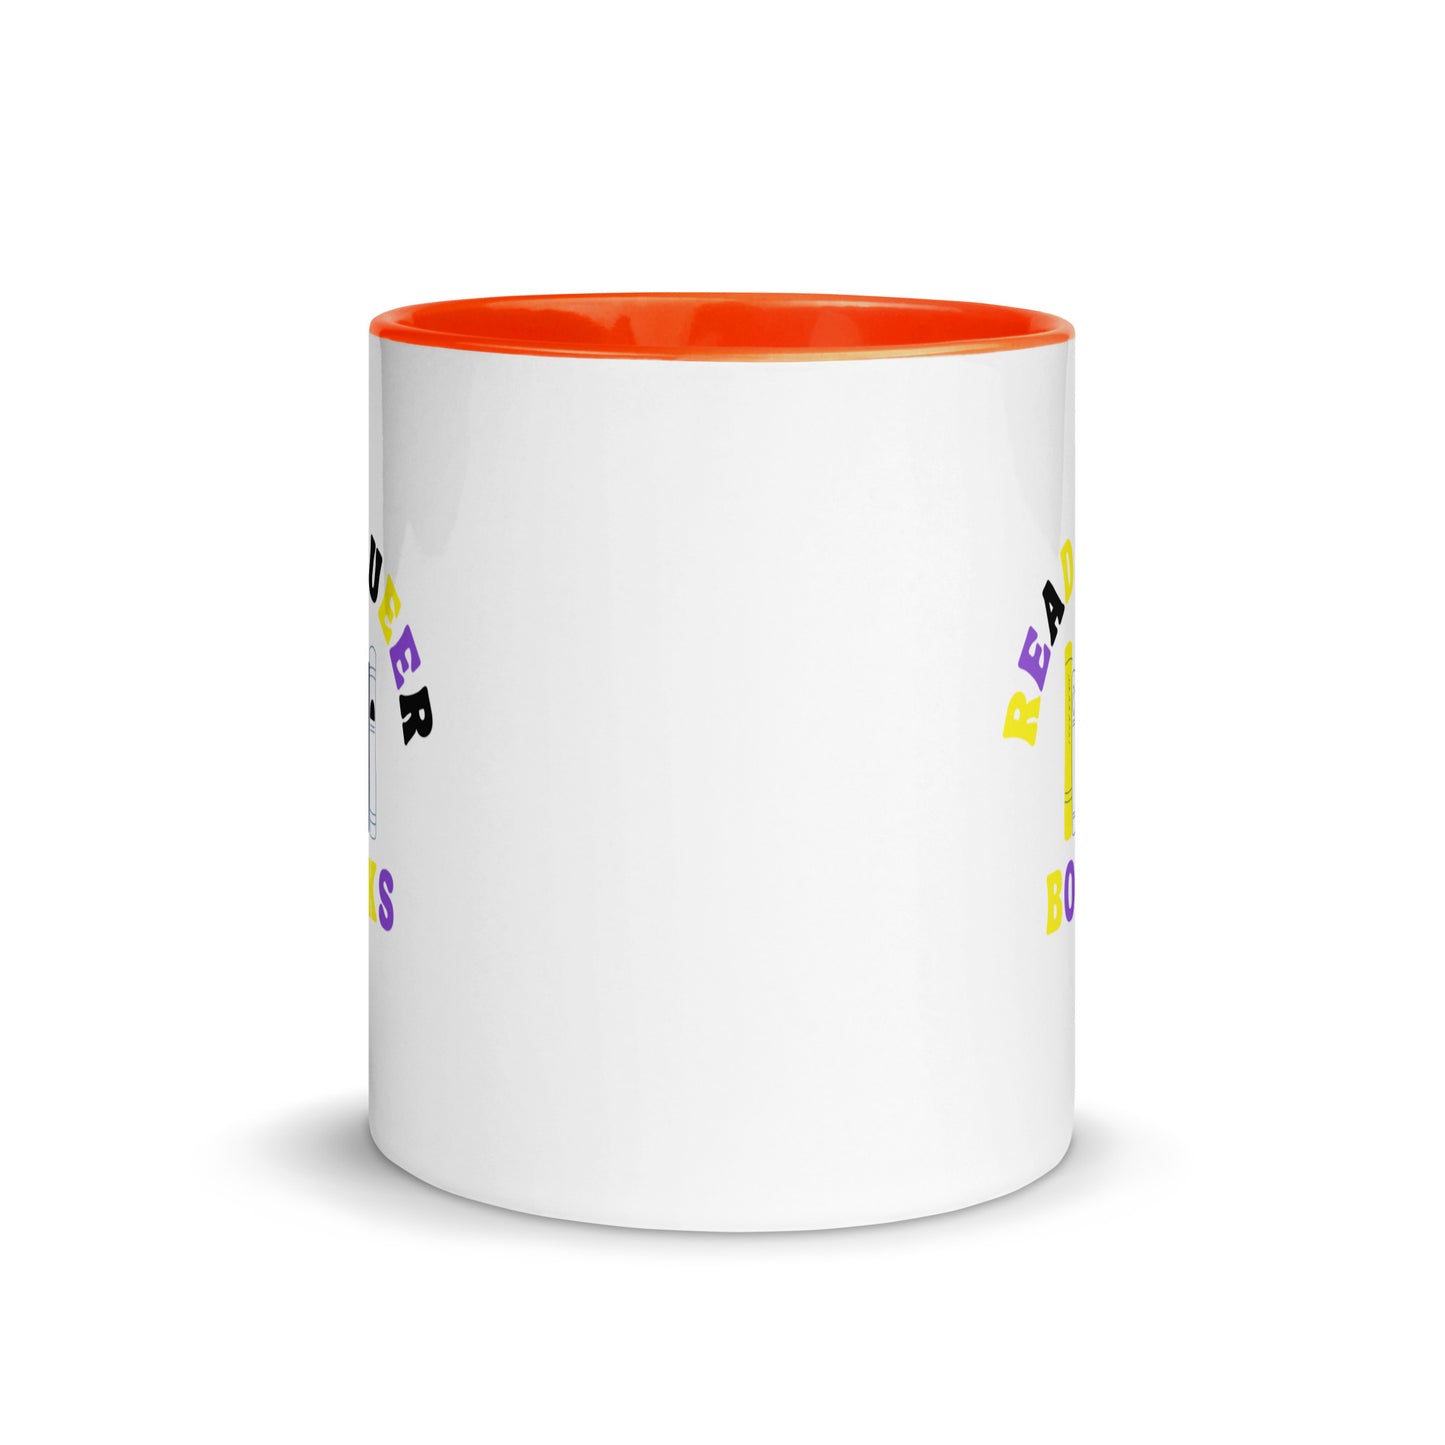 Read Queer Books (Nonbinary Colors) Mug with Color Inside